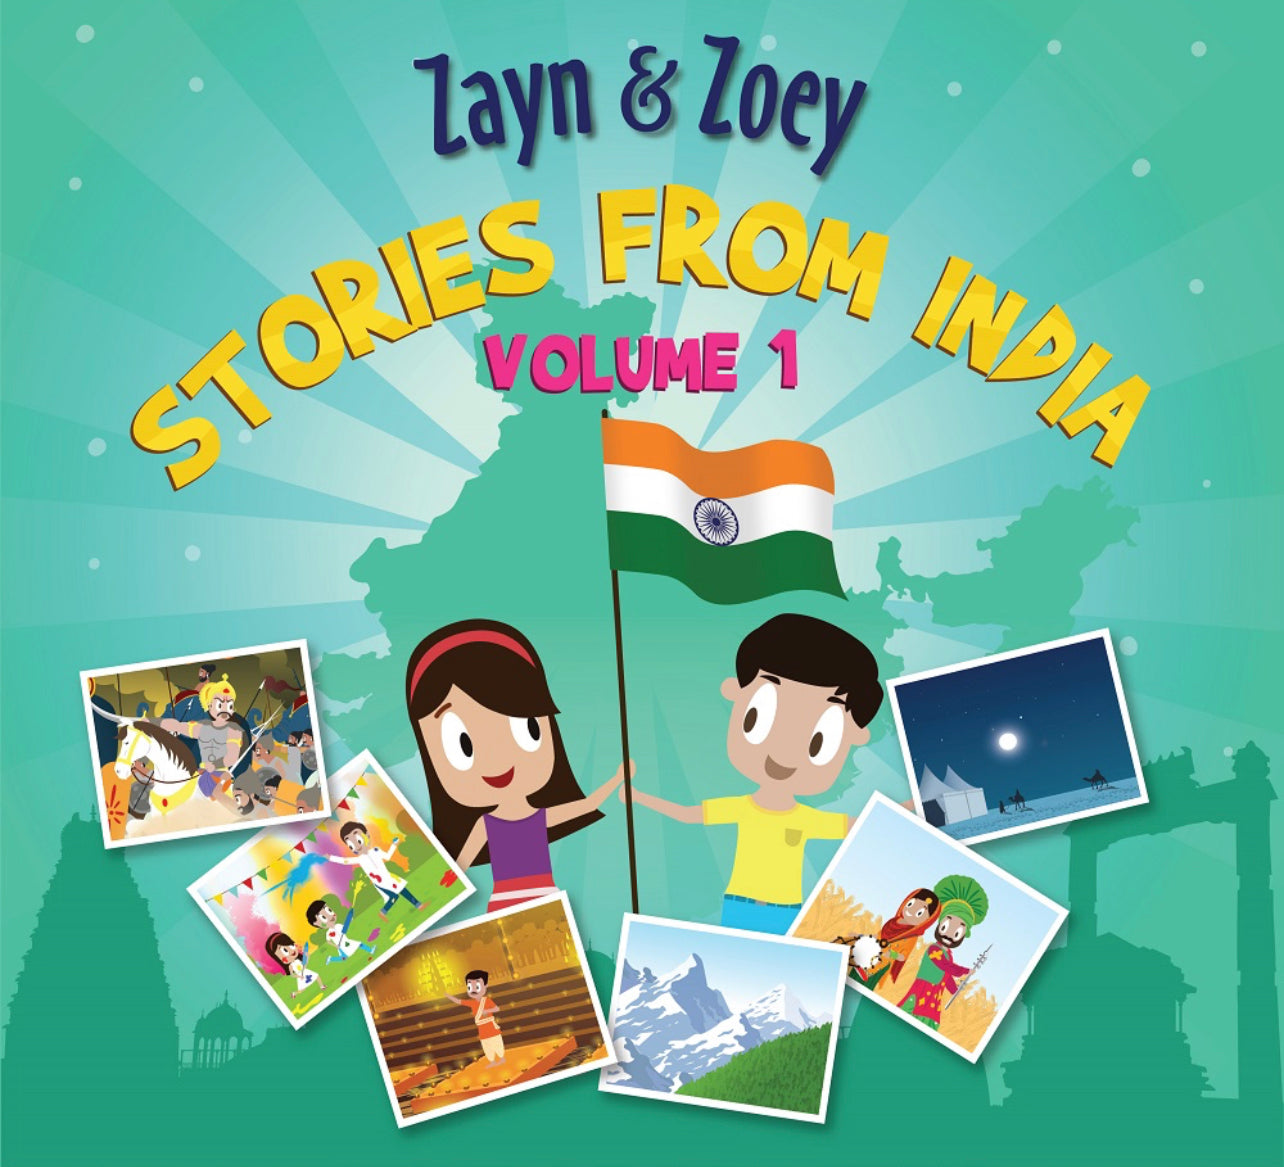 Zayn & Zoey – Stories from India (Volume 1)